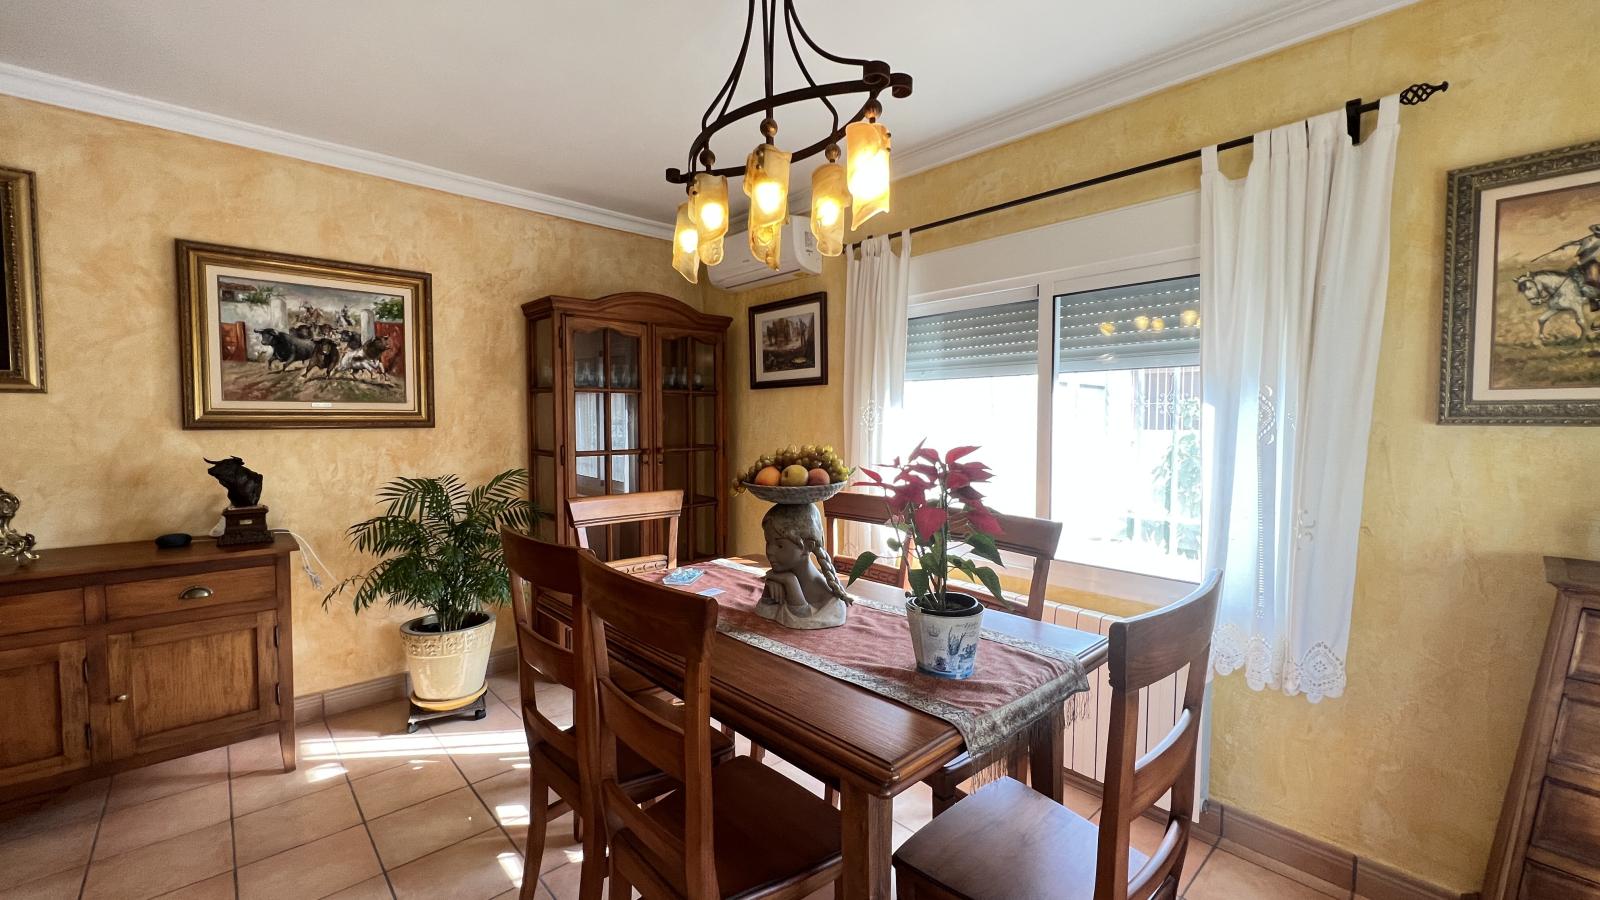 Charming villa in quiet residential area of Els Poblets, walking distance to the sea.